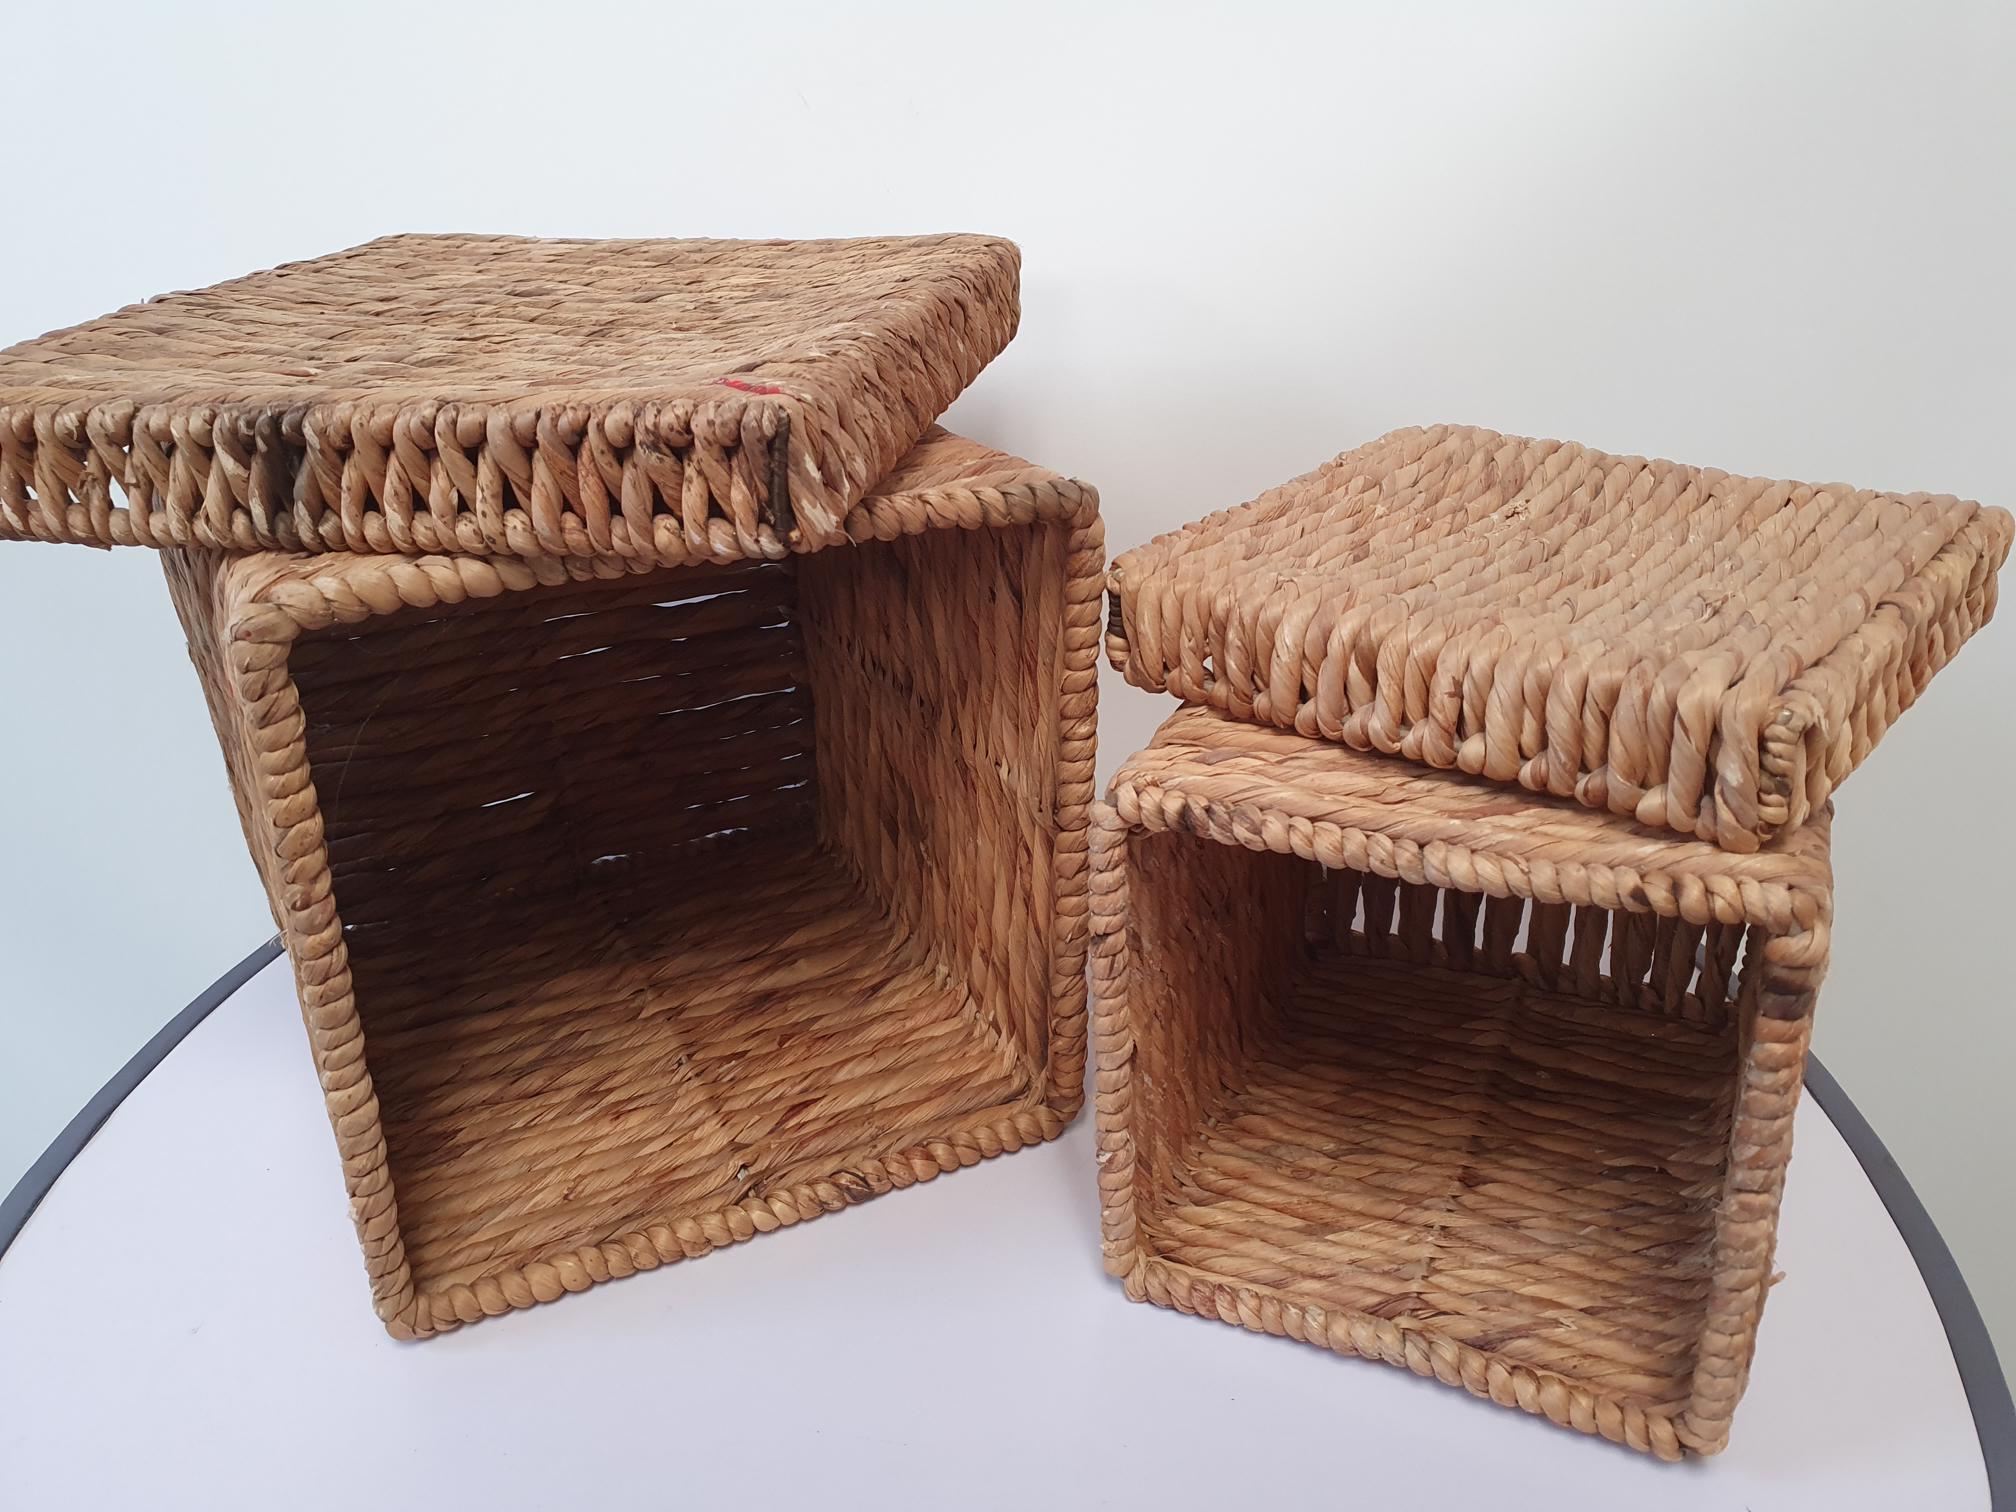 Wicker Pair Baskets - Image 4 of 6